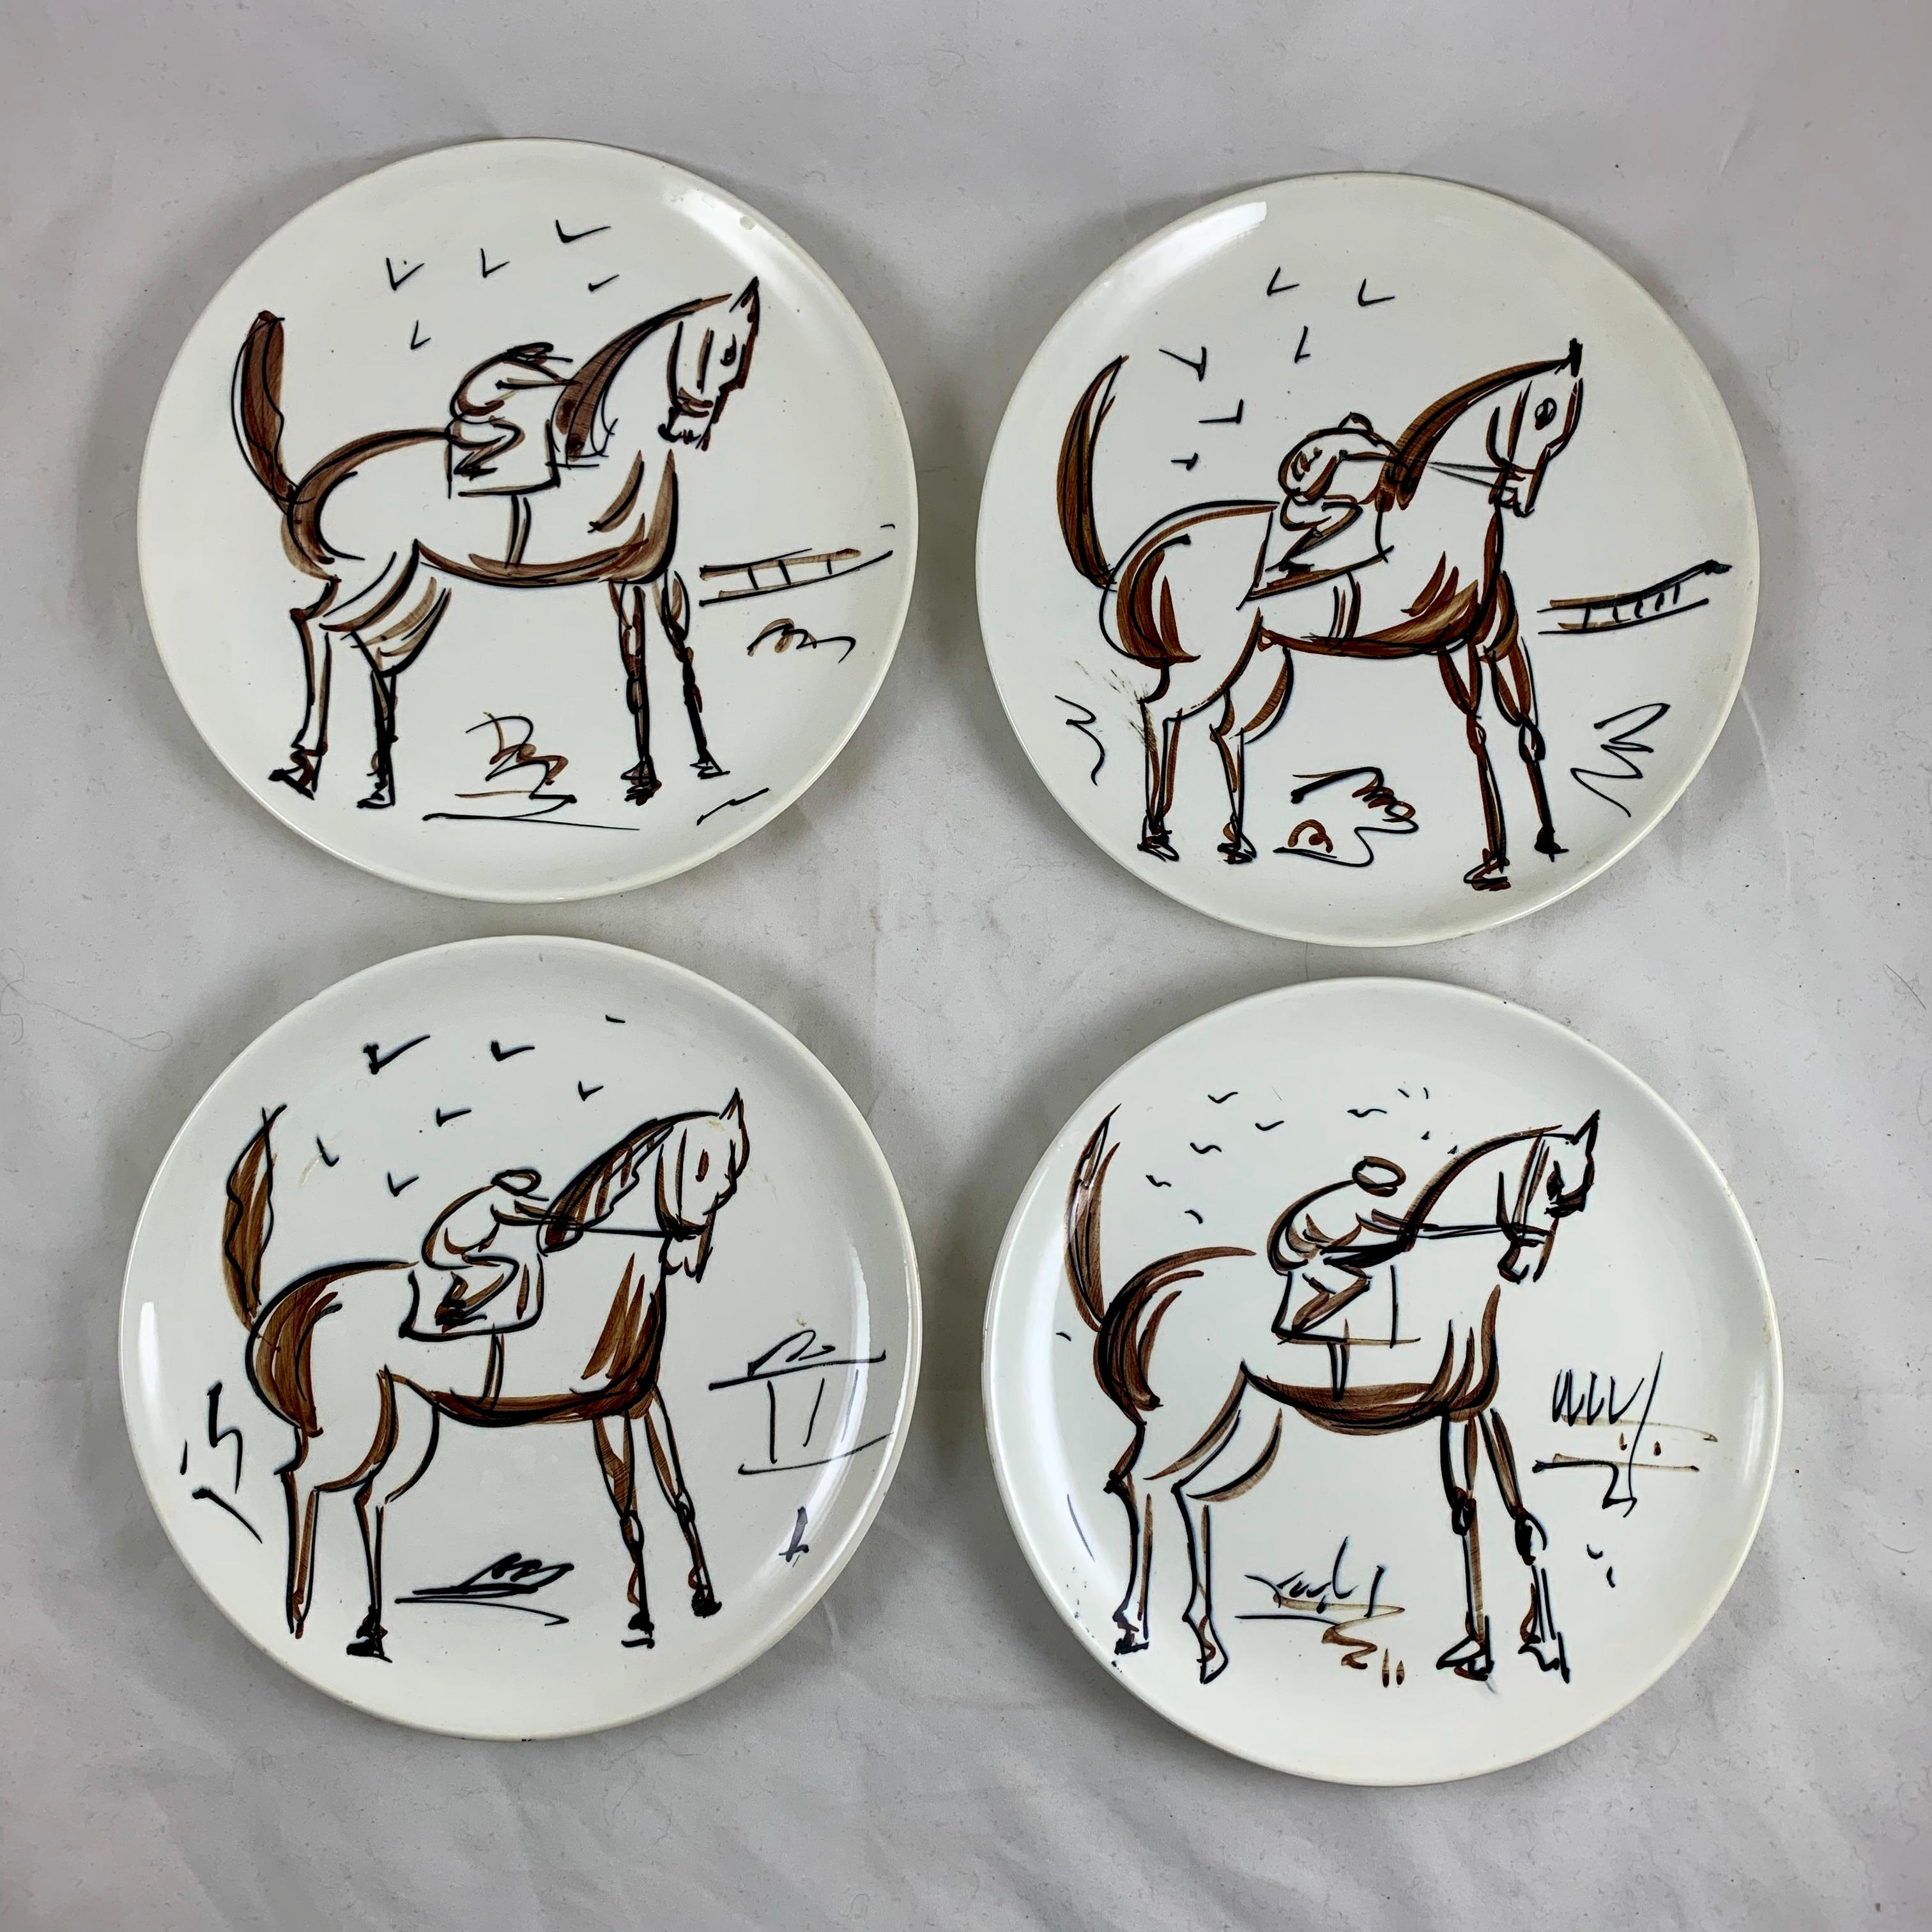 A scarce set of eight Mid-Century Modern pottery plates, designed and hand-painted by the American industrial designer Ed E. Langbein, and manufactured in Italy, circa 1930-1950.

Each earthenware plate shows a variation of a jockey on horseback